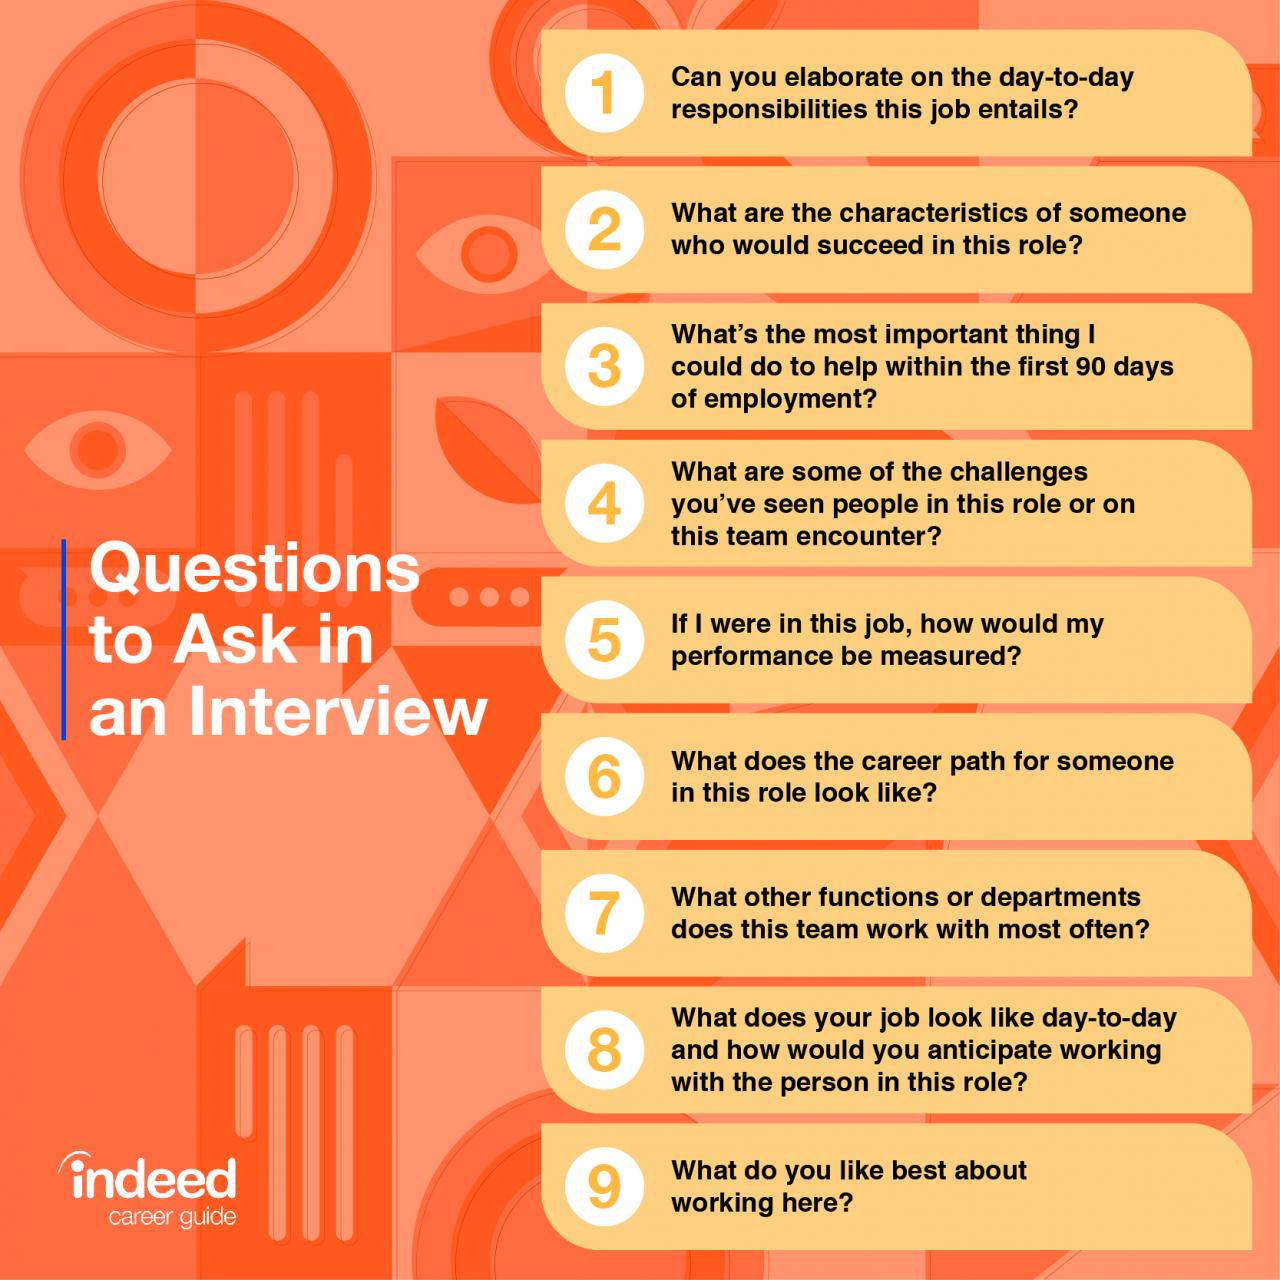 Excellent questions to ask an interviewer